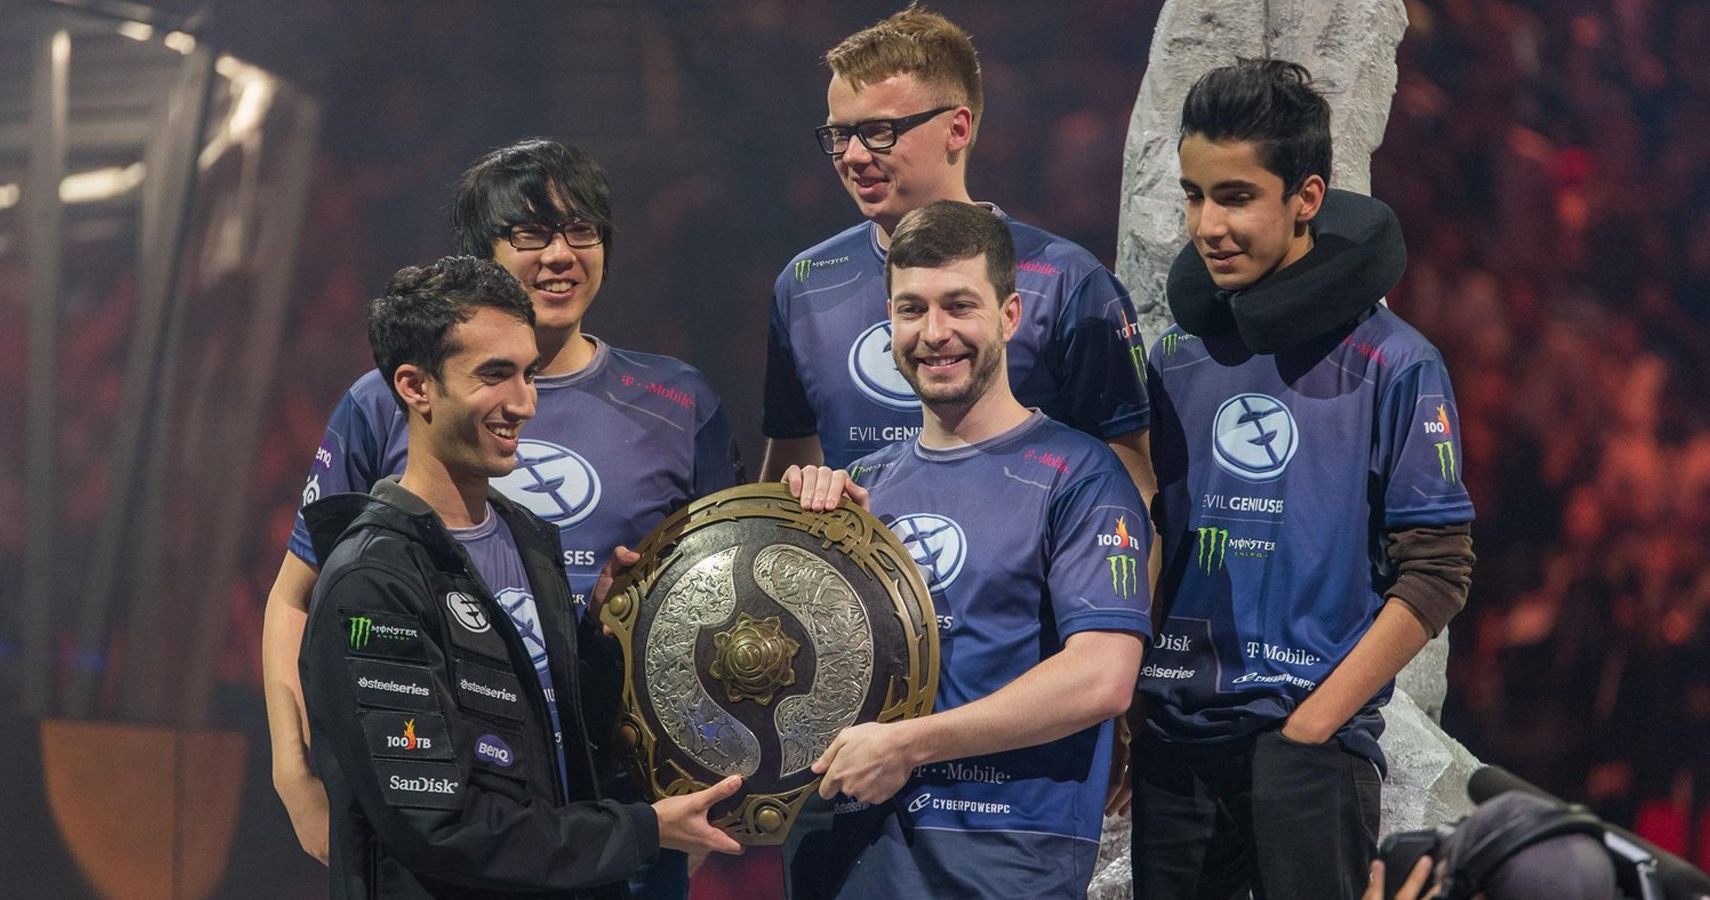 18-Year-Old League Of Legends Prodigy Suffered Malnutrition And Lack Of Care